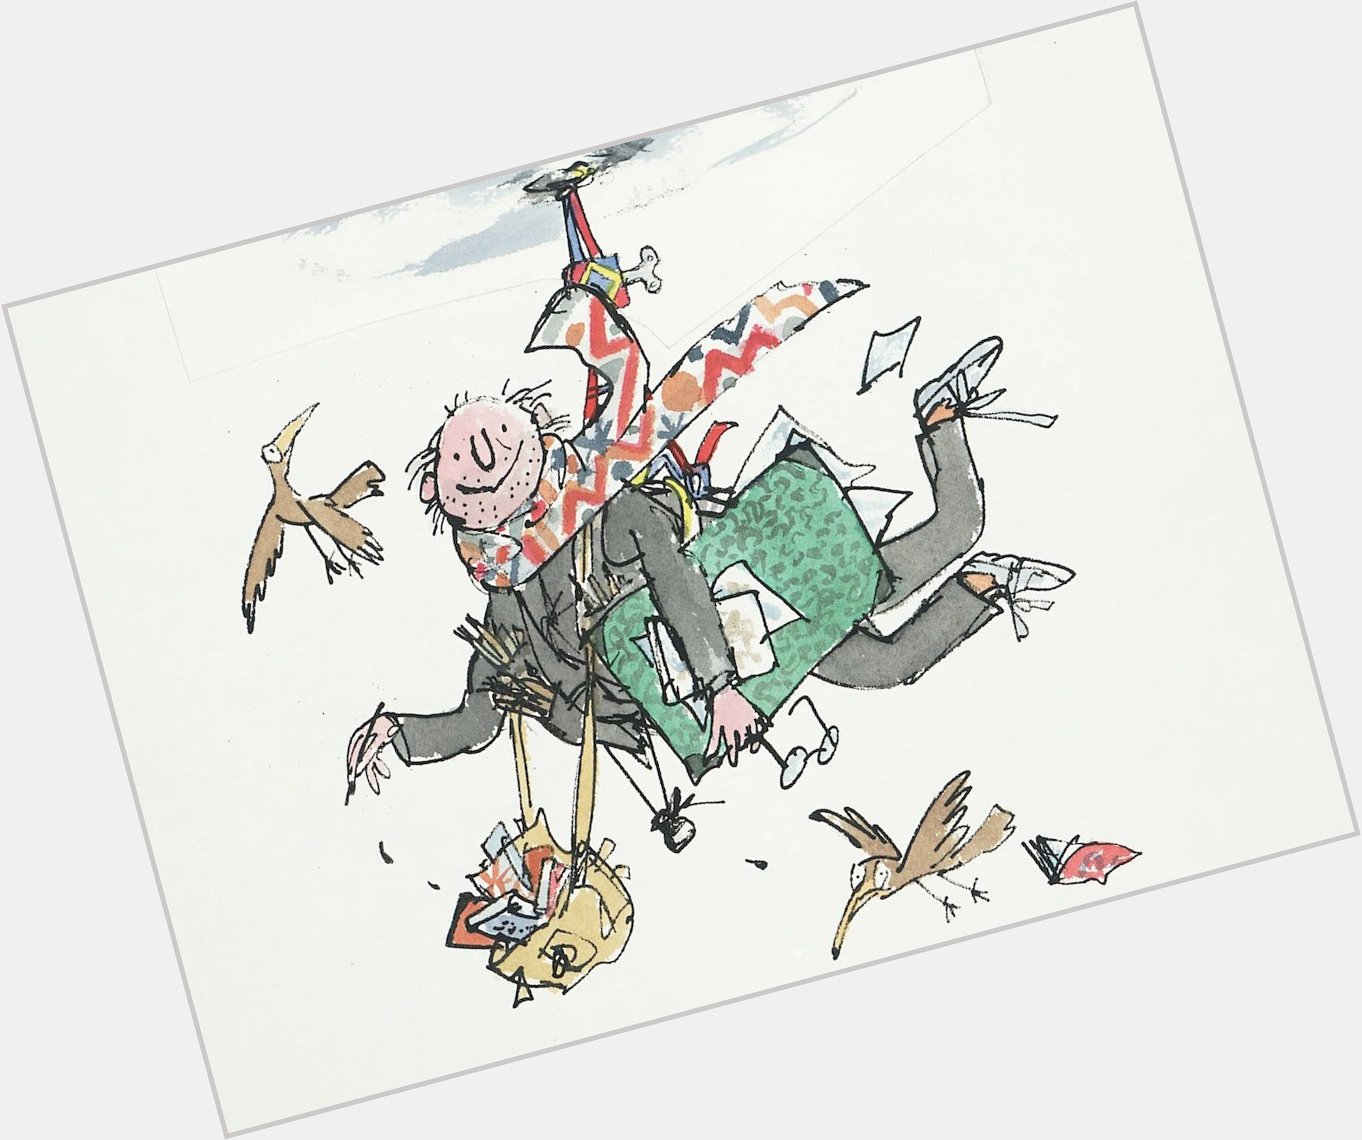 I can\t quite believe Quentin Blake is 90 today. What an innovative and brilliant illustrator.
Happy Birthday! 